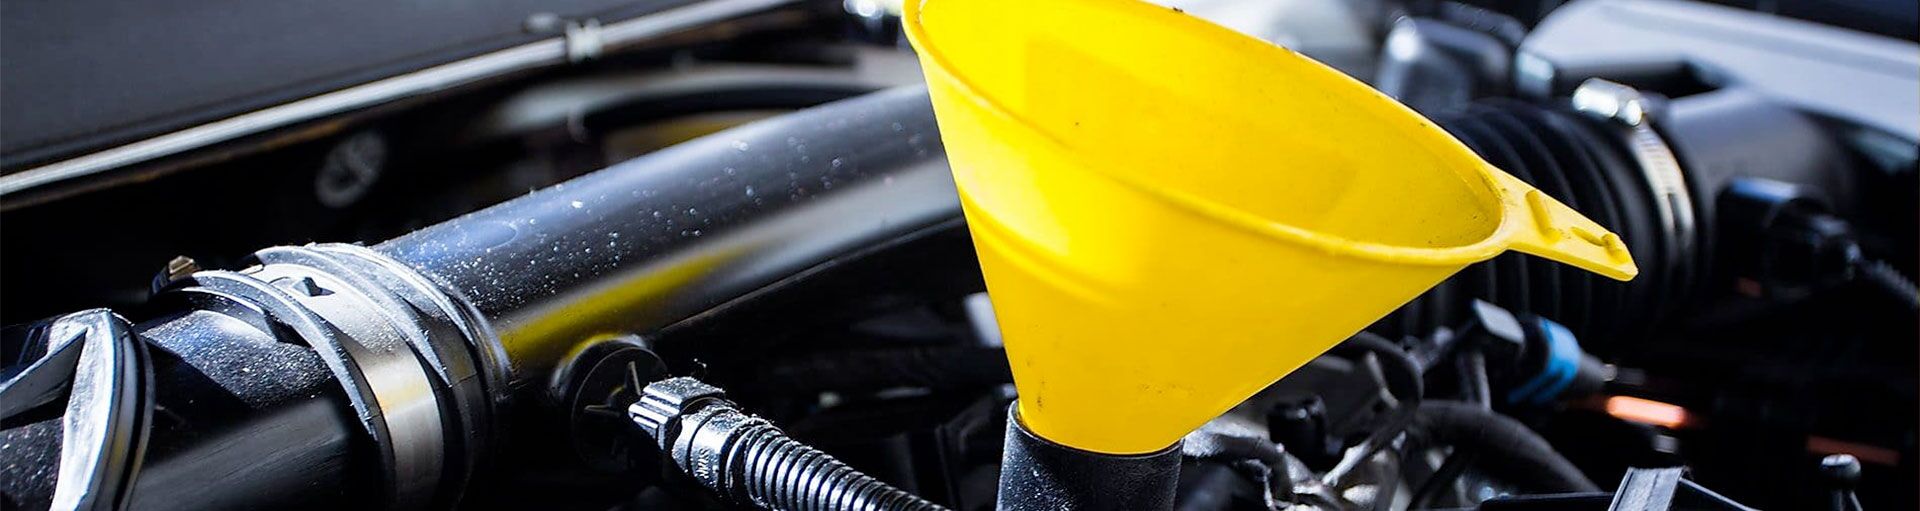 The Oil Change Process | Dale Howard Auto Center of Waverly in Waverly IA